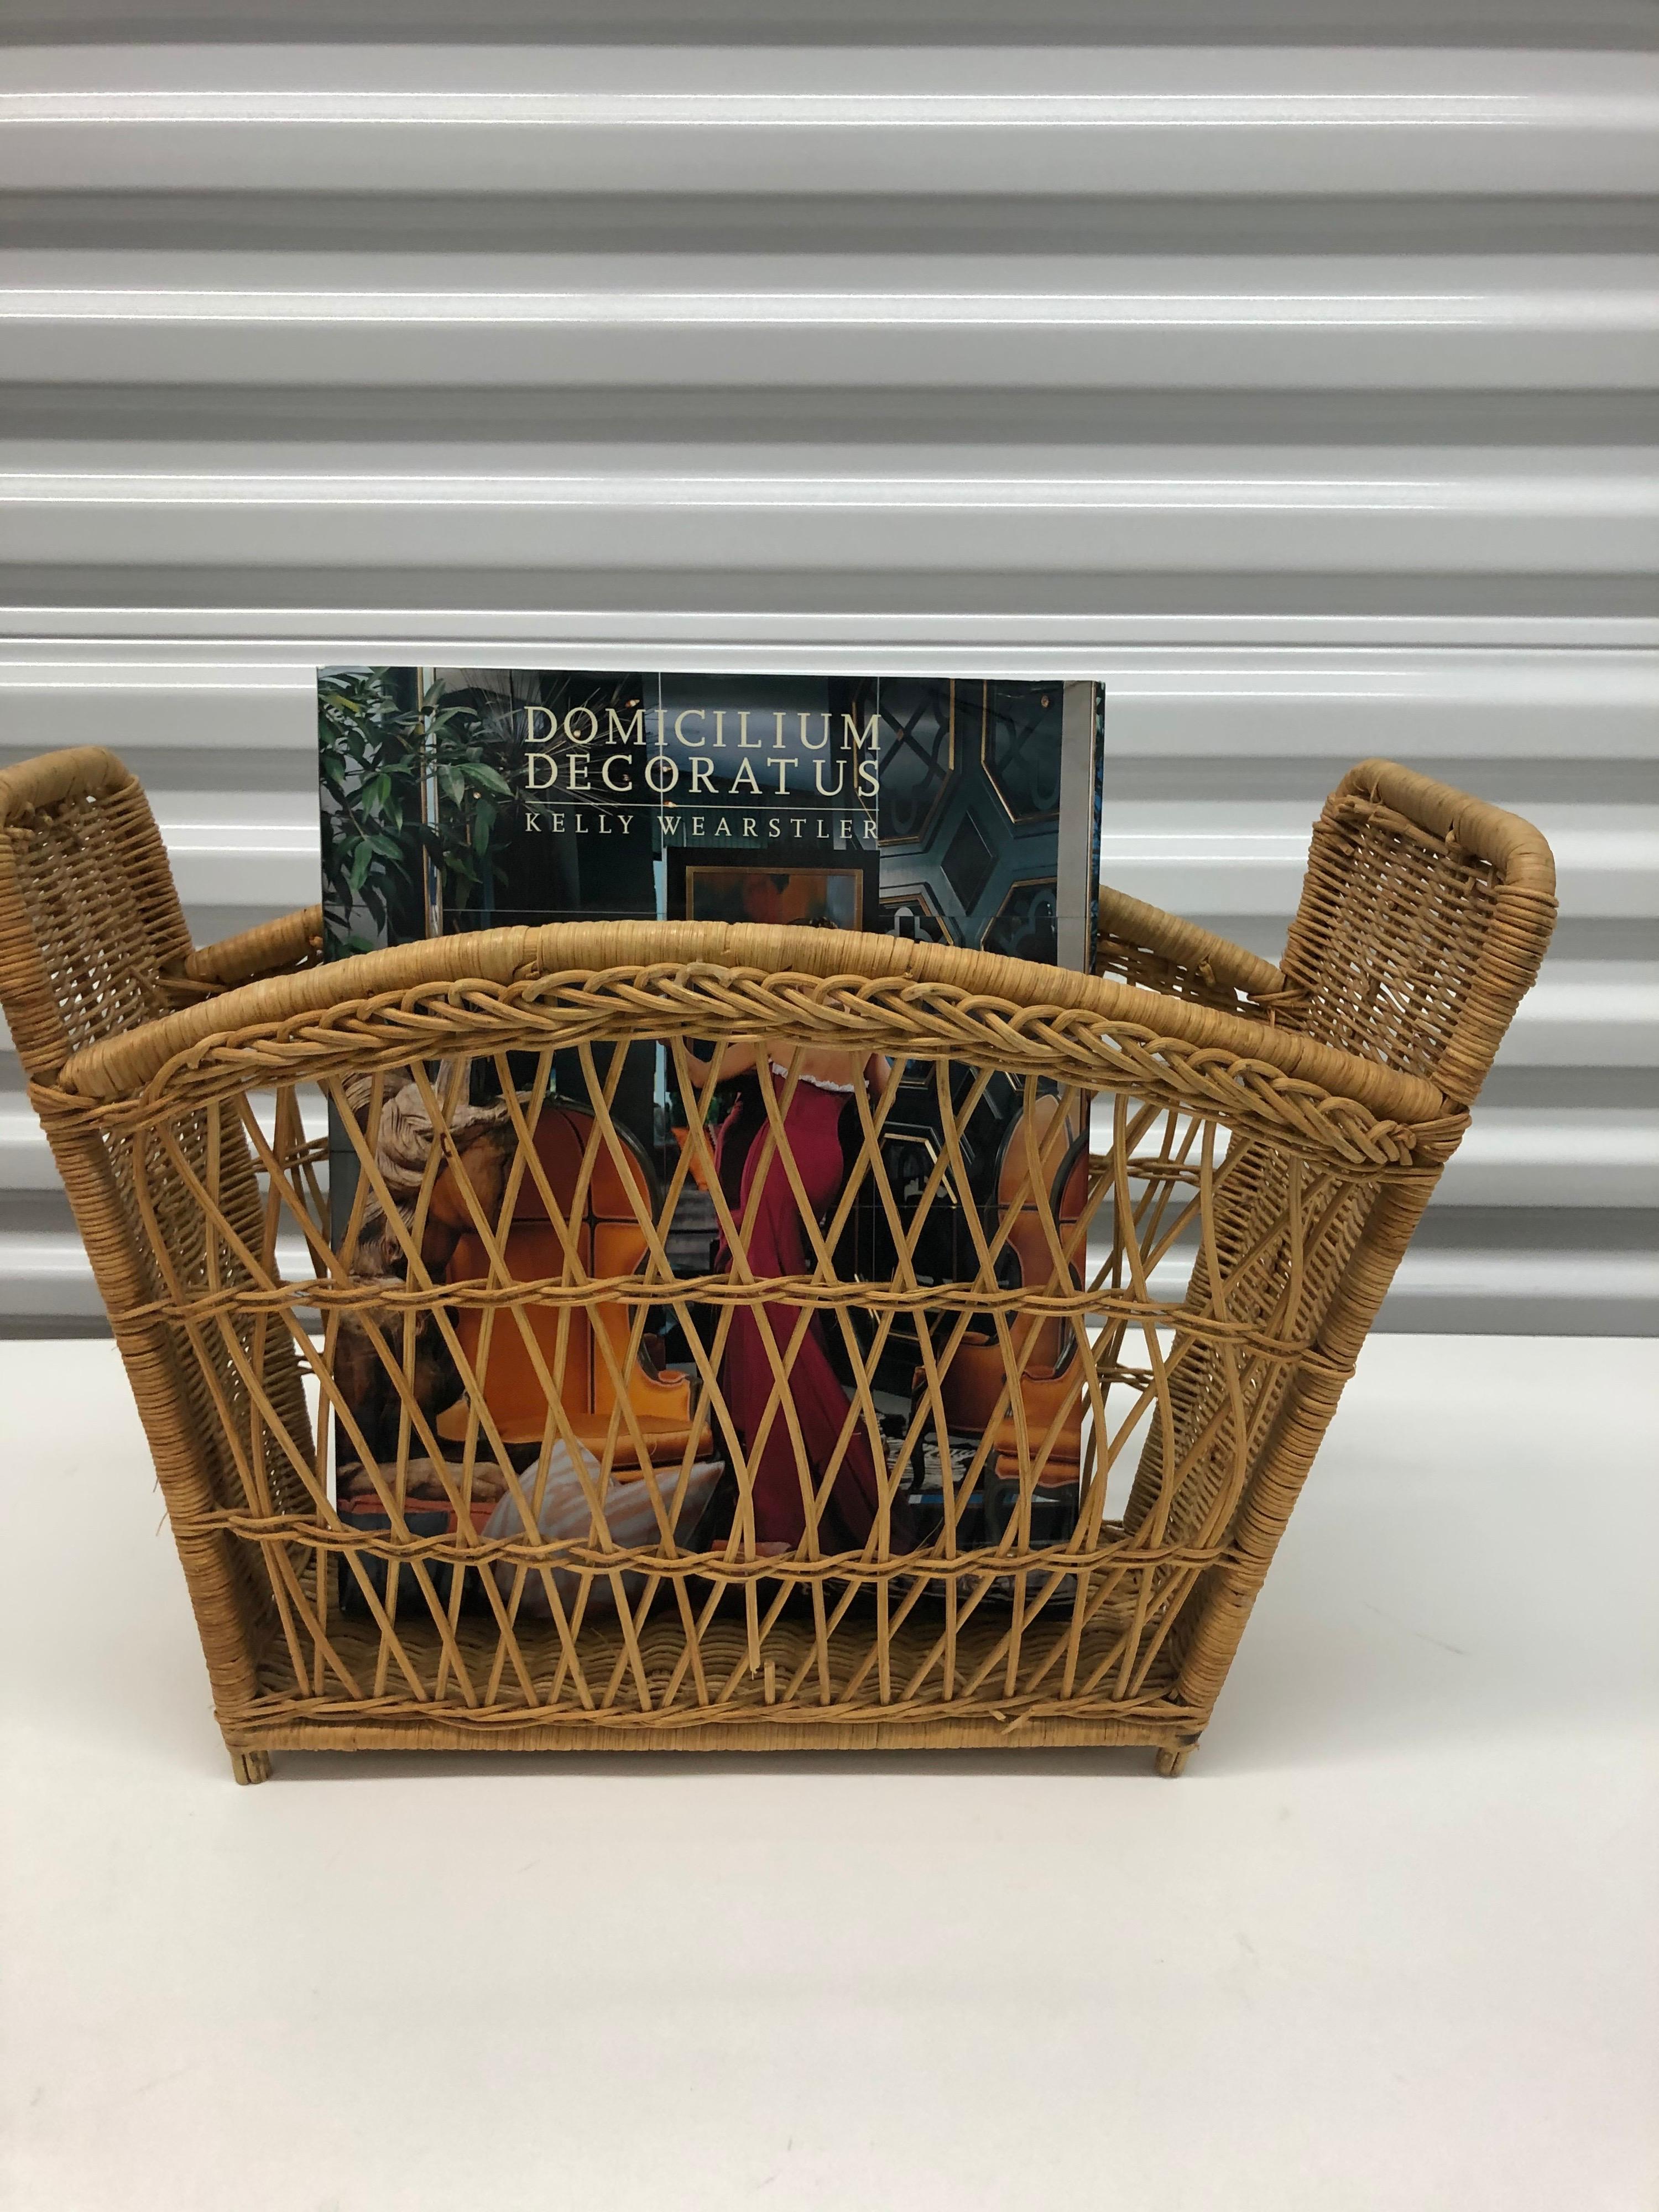 Vintage Asian woven rattan magazine rack
Rattan vintage magazine rack or holder. Intertwined rattan on bended bamboo. Artisanal style.
Size: 16” W x 6” D x 12” H.